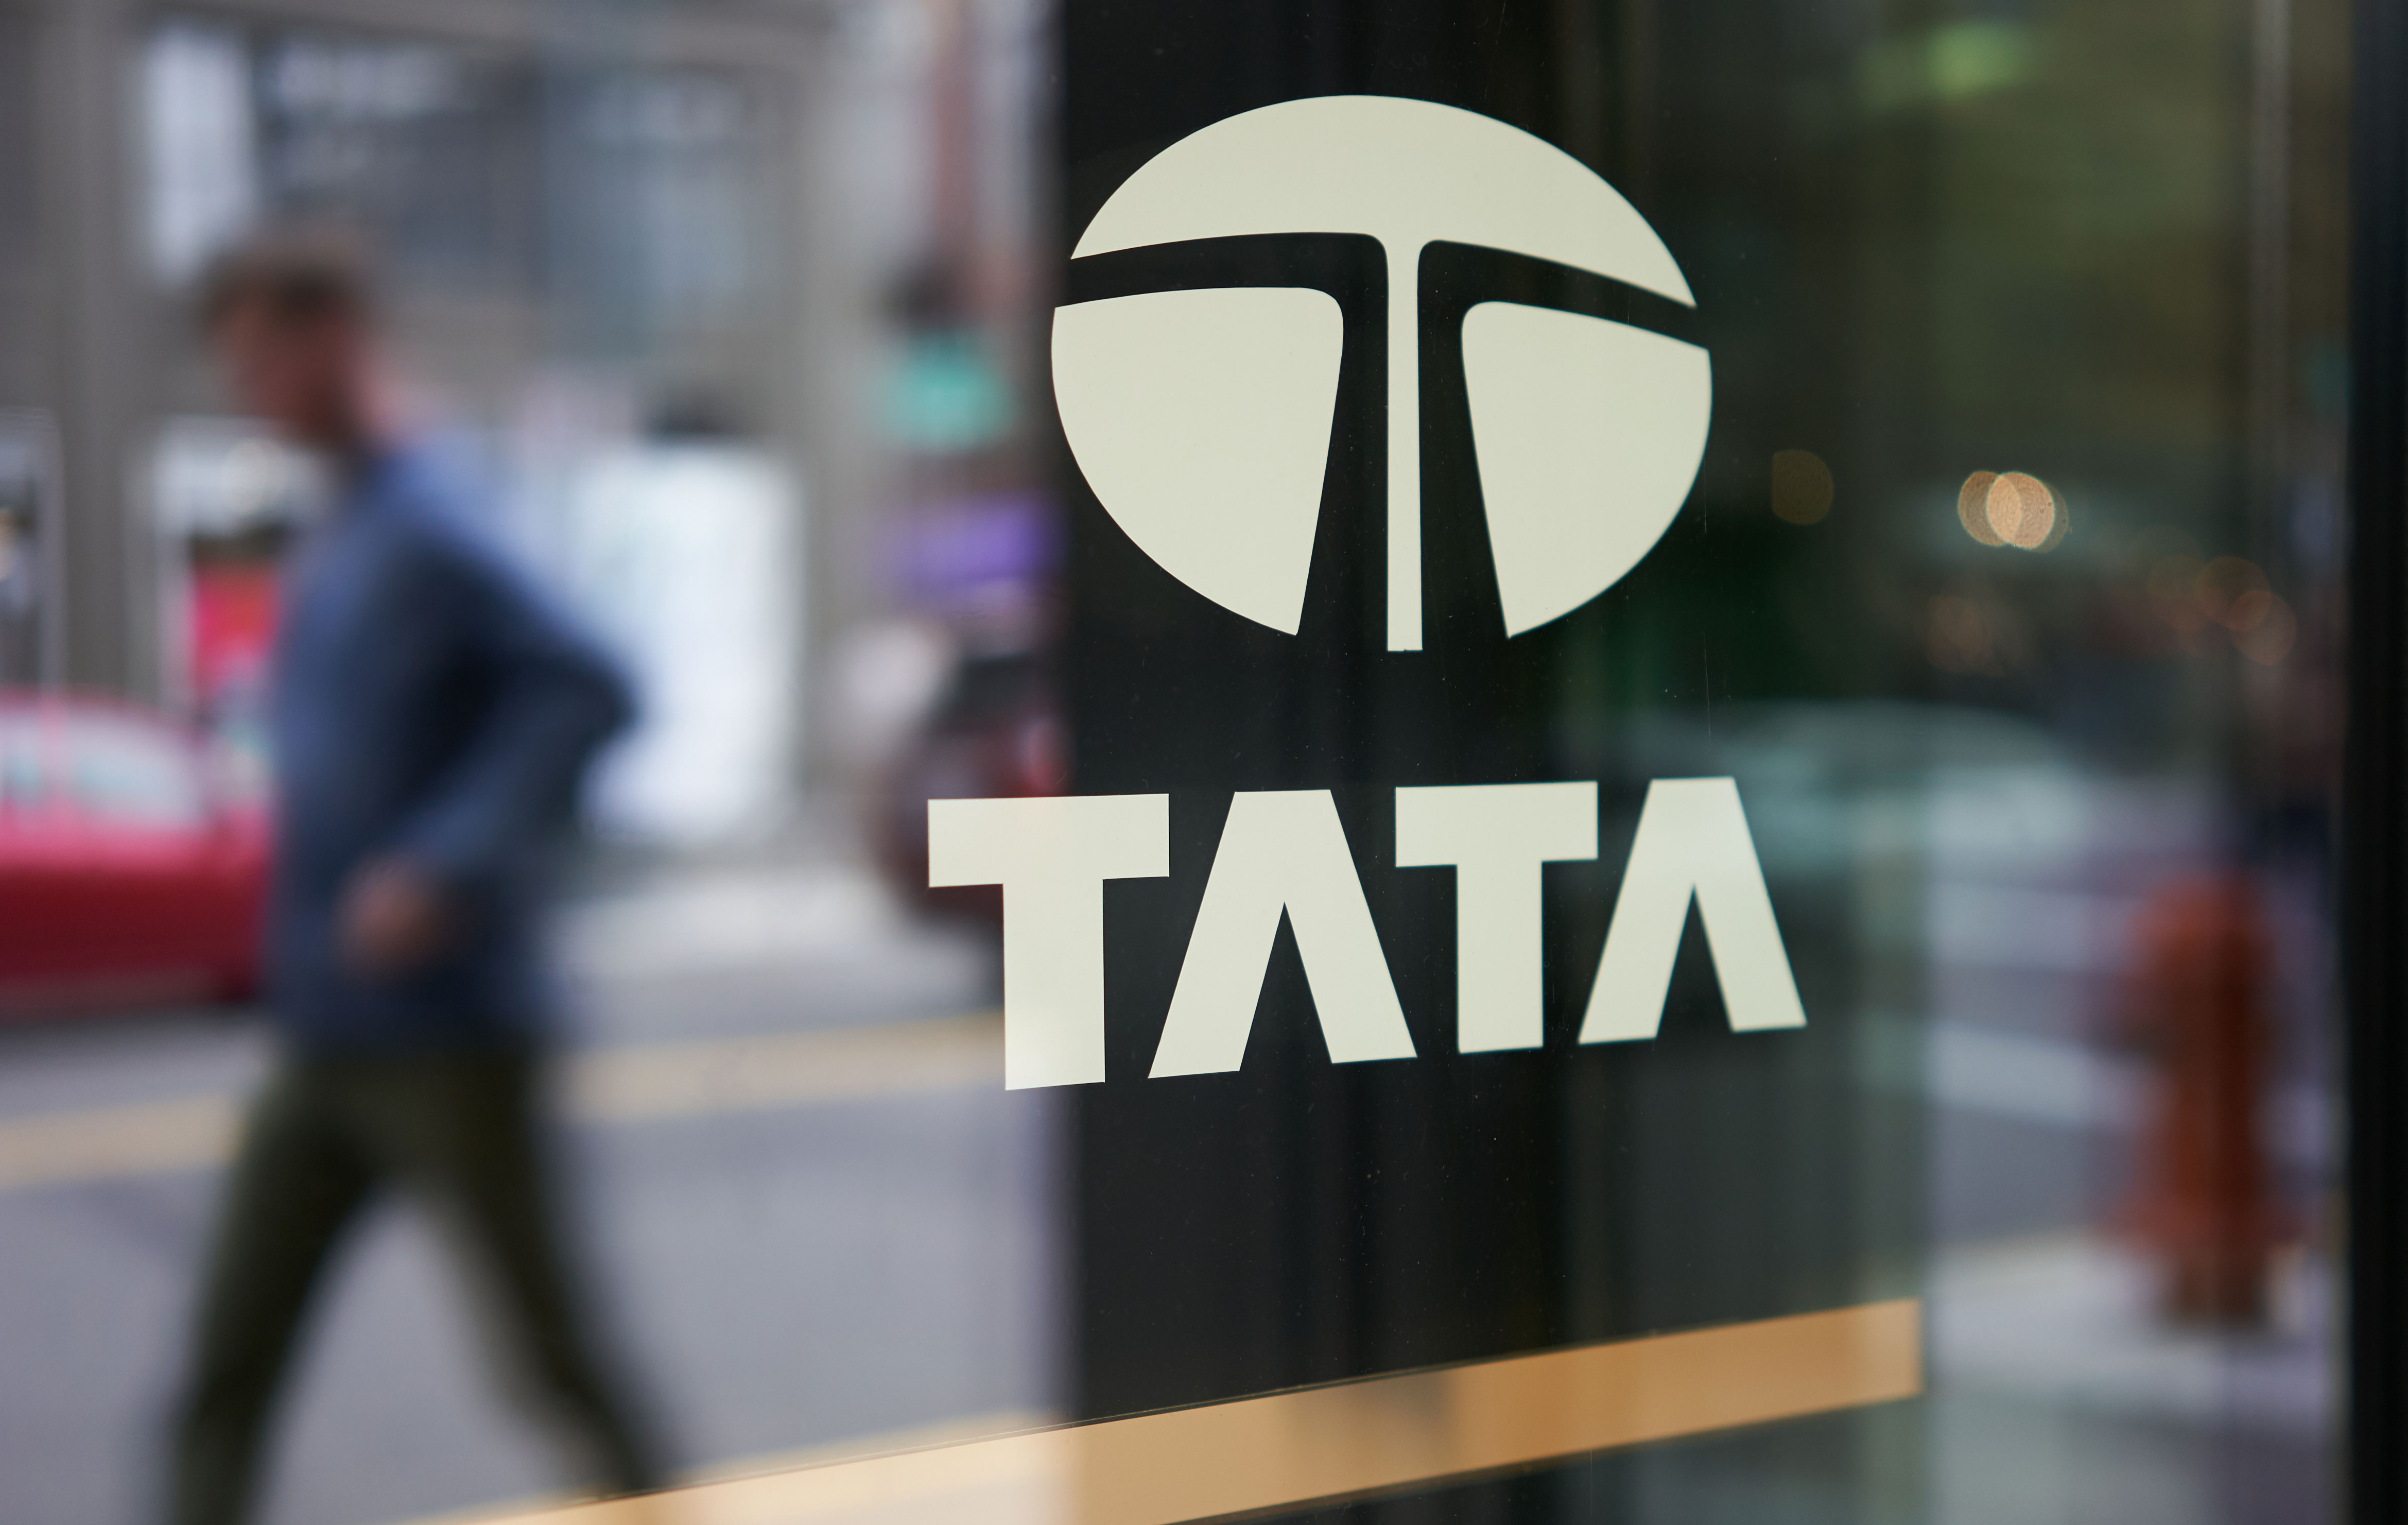 NCLAT has made a serious error in law by concluding that Tata Sons was a public company.